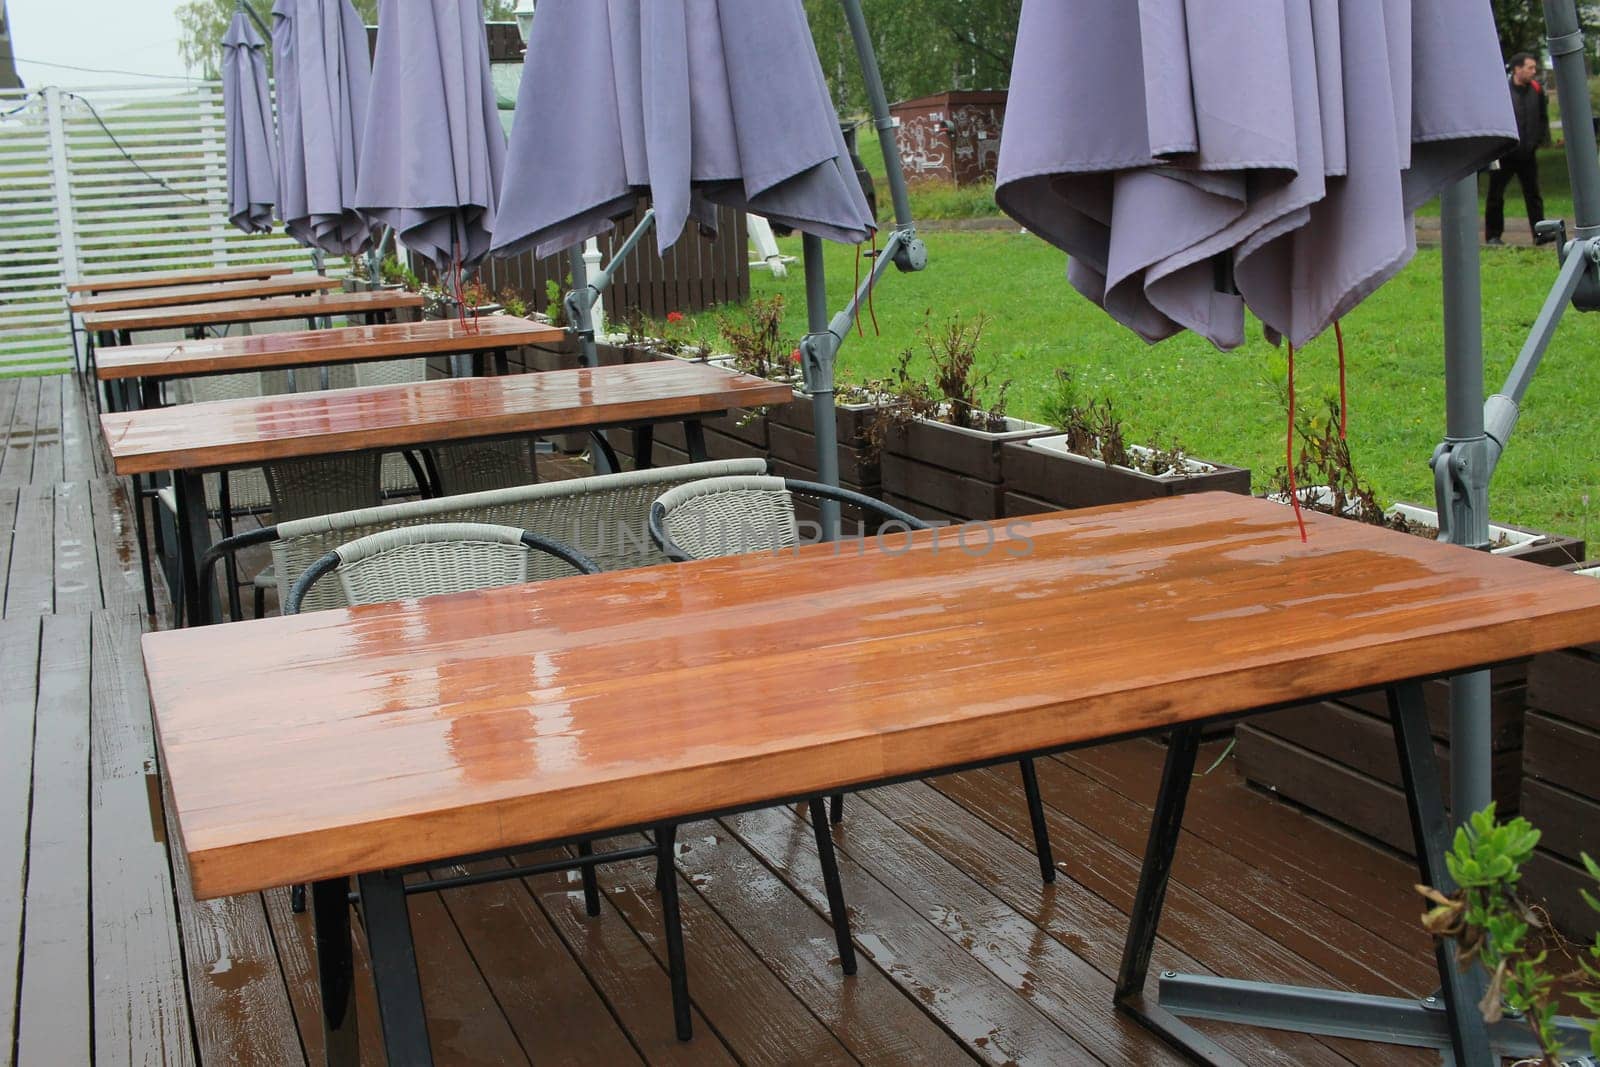 Photo after the rain, outdoor cafe tables. A closed restaurant. Outdoor playground.